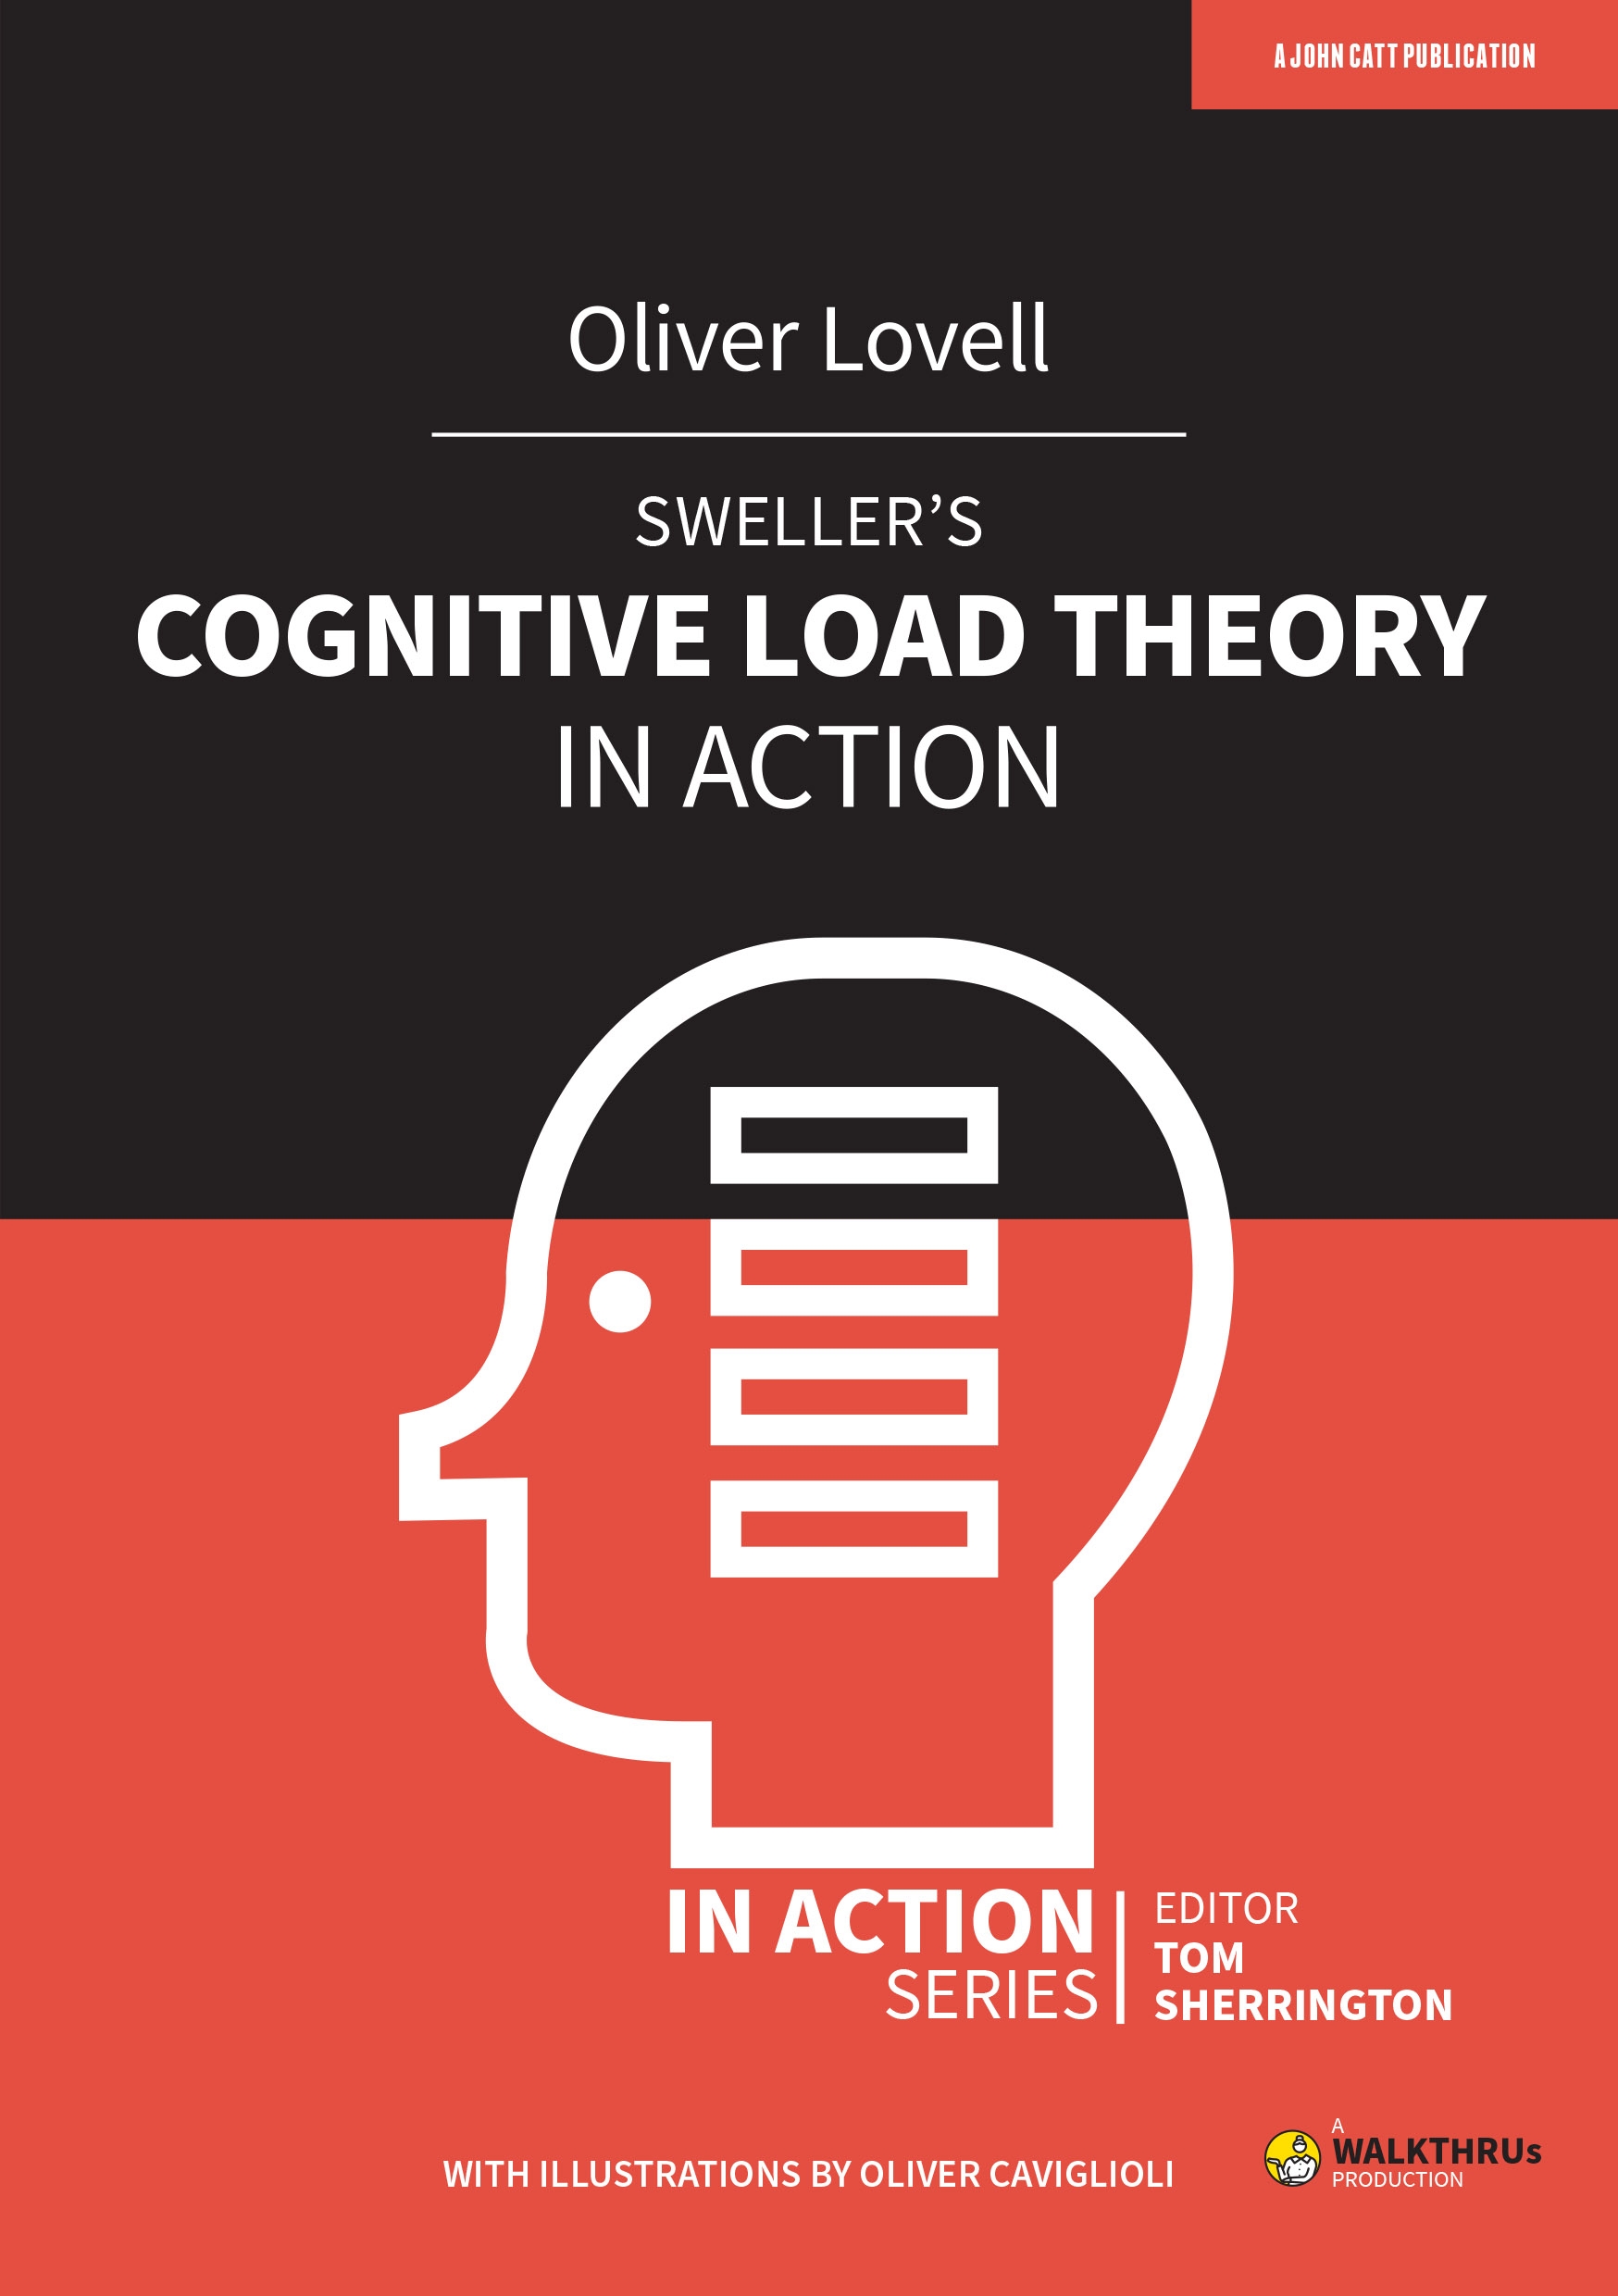 Featured image for “Sweller's Cognitive Load Theory in Action”